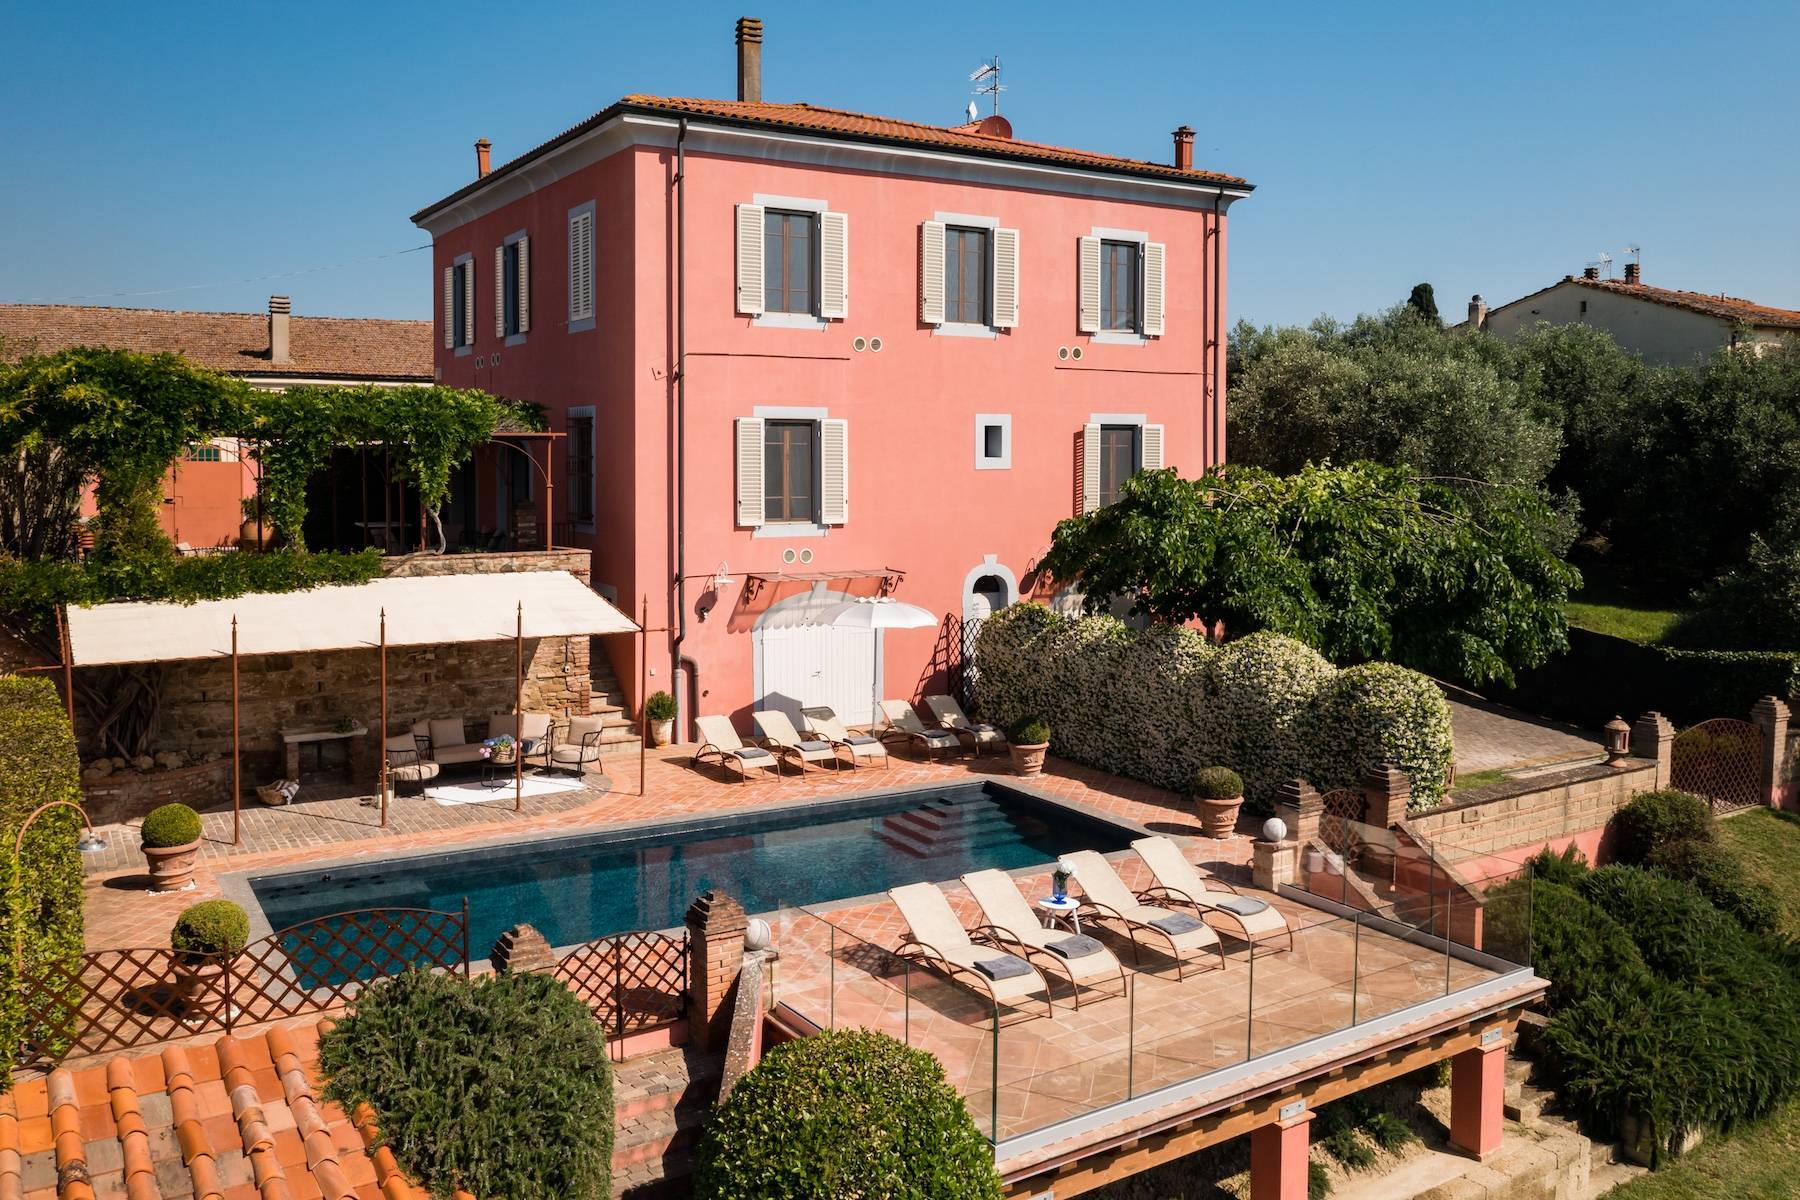 Elegance and style in the heart of a Tuscan medieval village